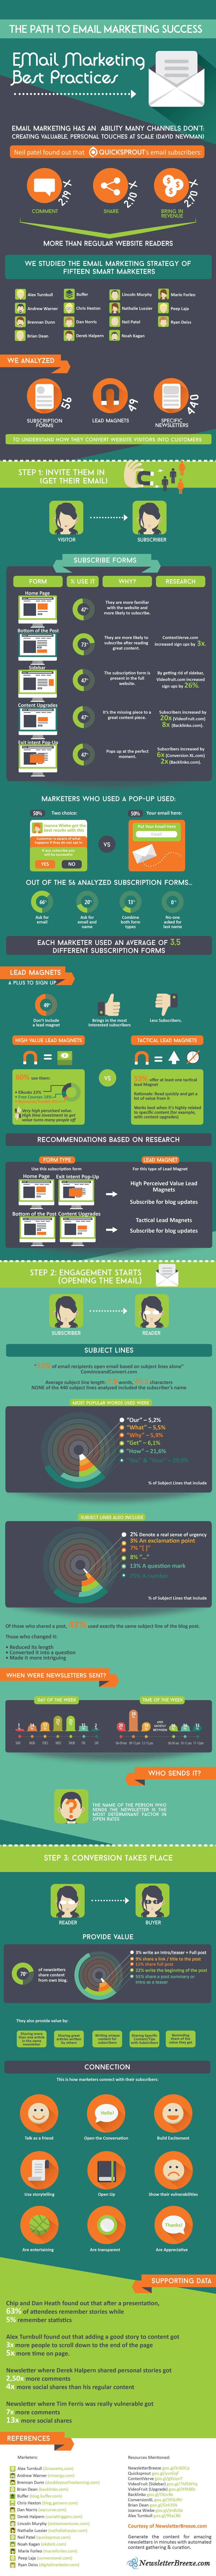 emails best practices info